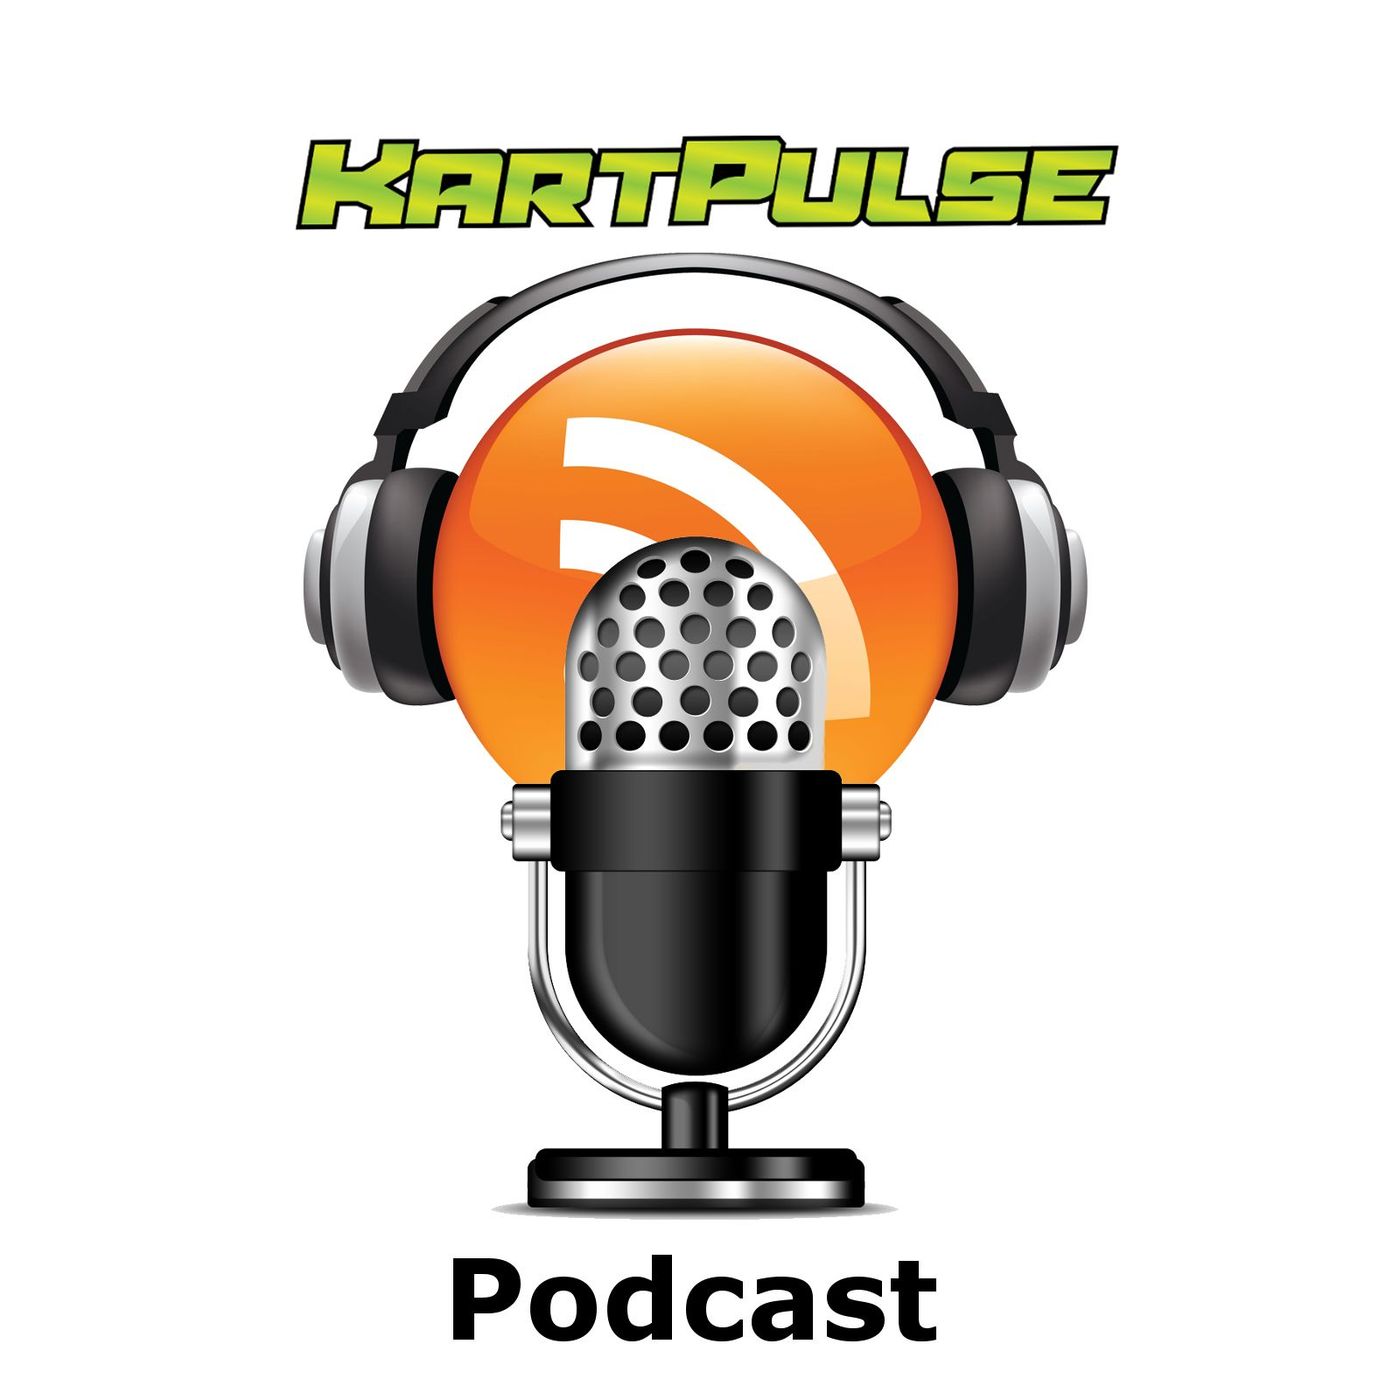 KartPulse Podcast! Insightful conversations with the karting community. Join us at forums.kartpulse.